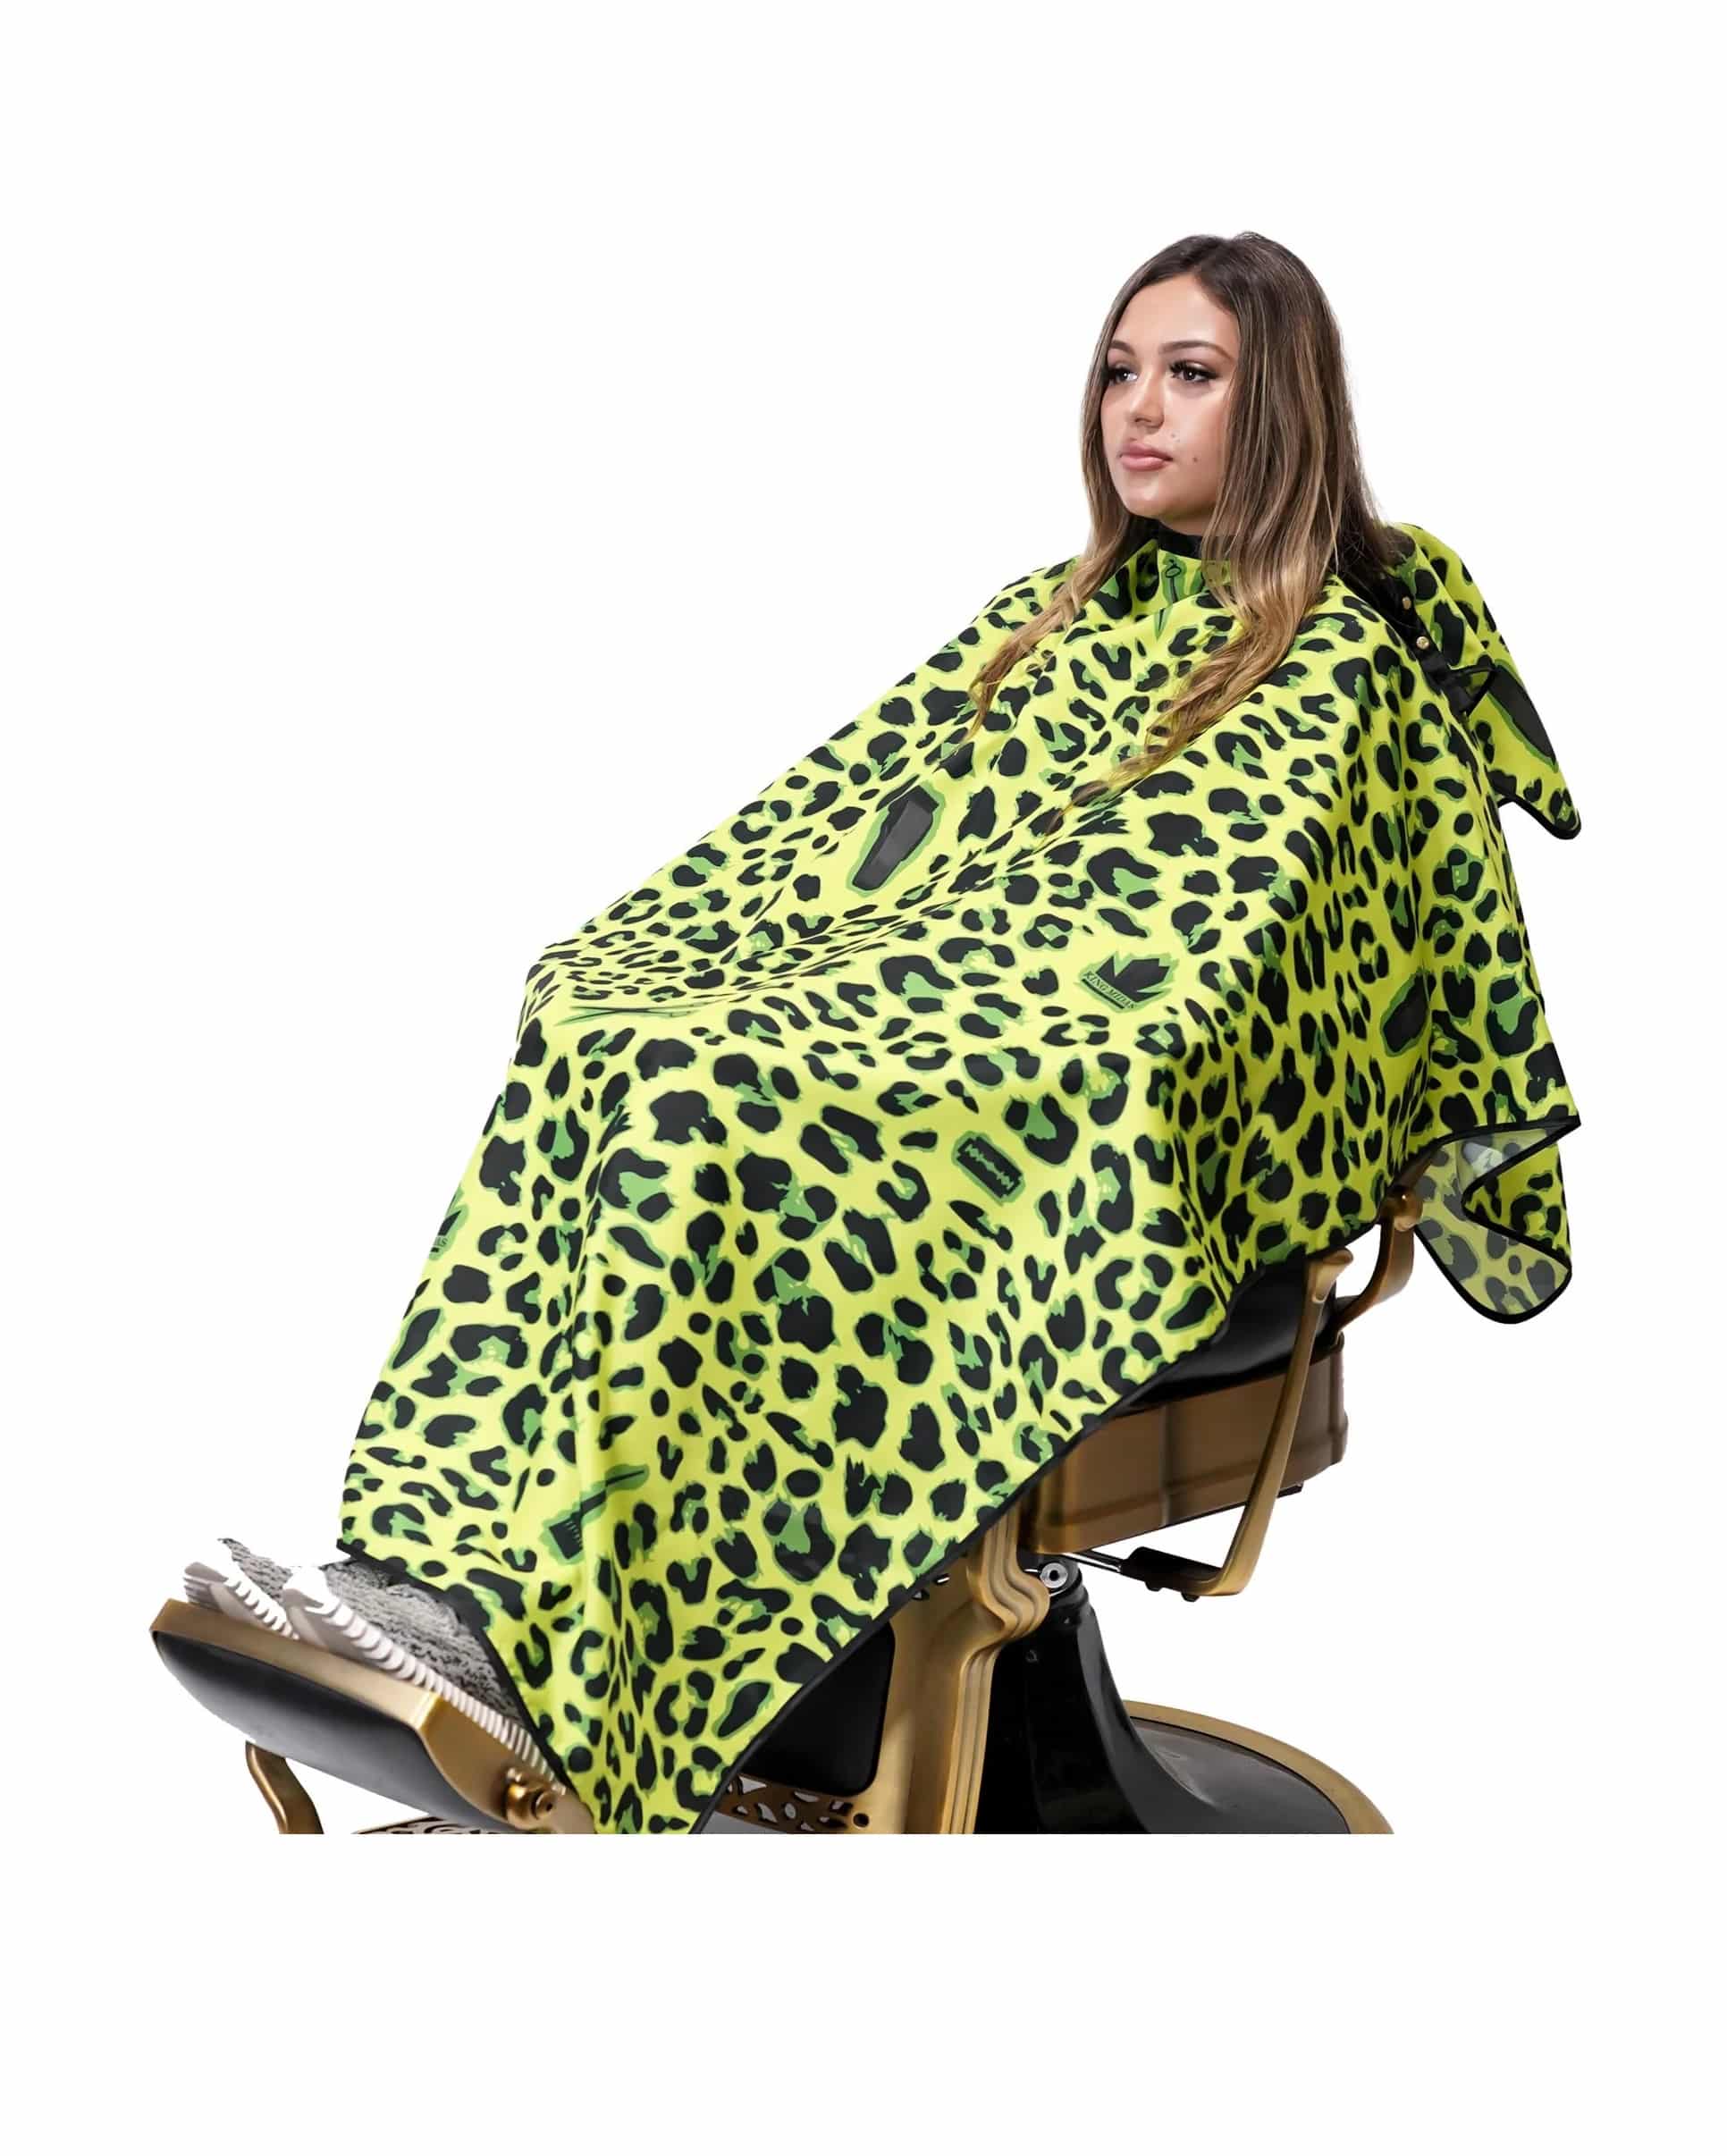 Exotic Leopard Hair Stylist Cape Collection